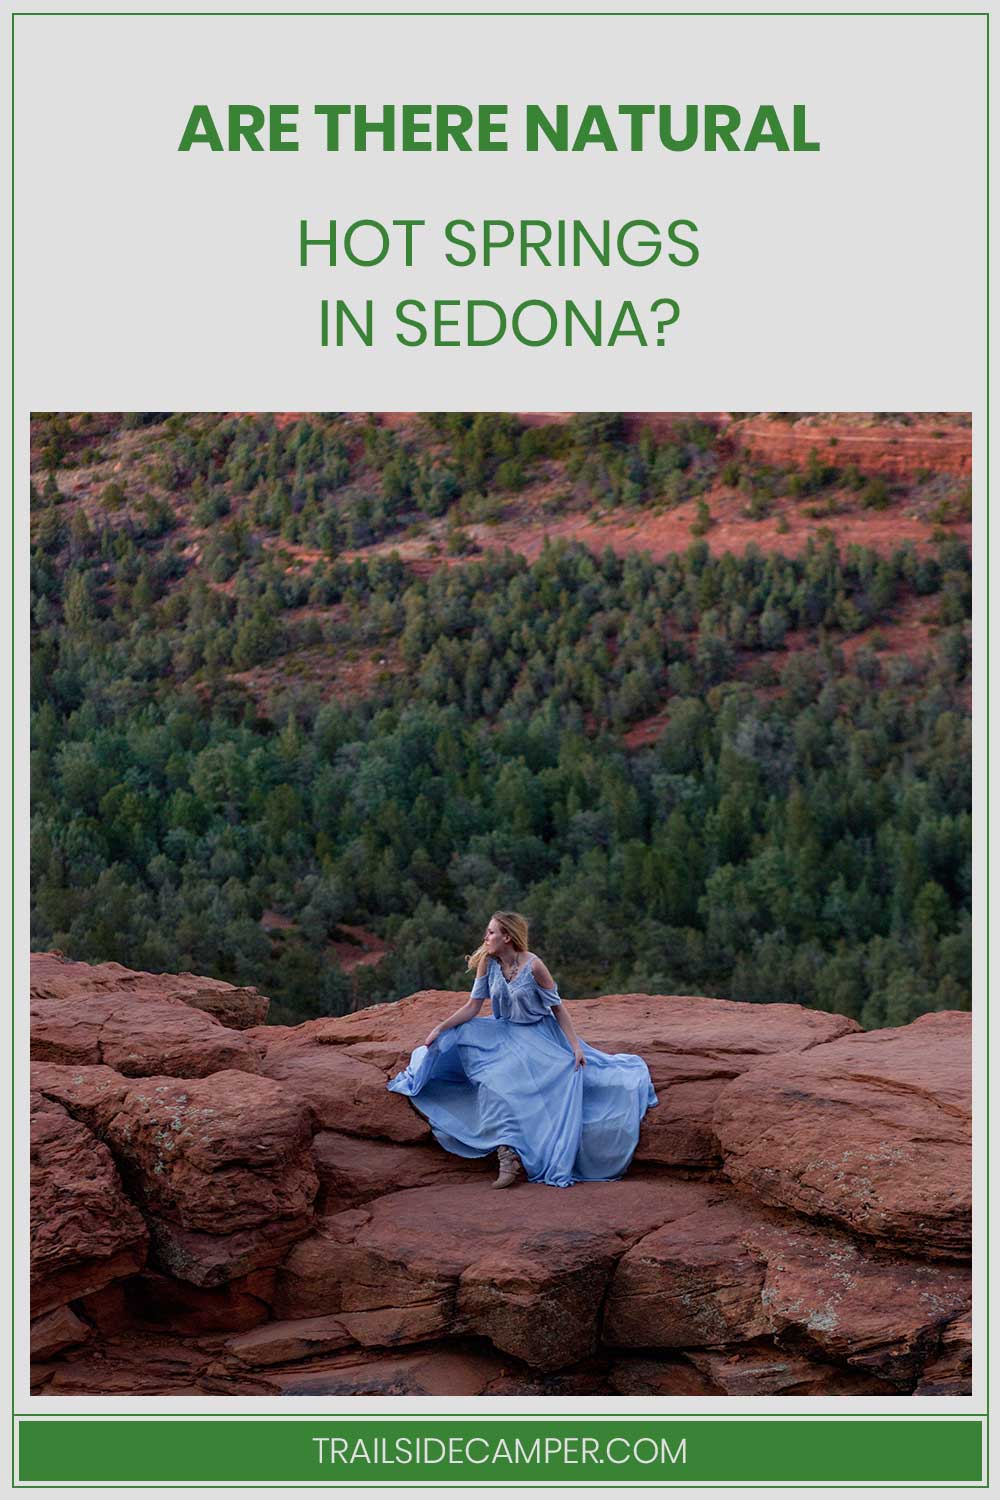 Are There Natural Hot Springs in Sedona?